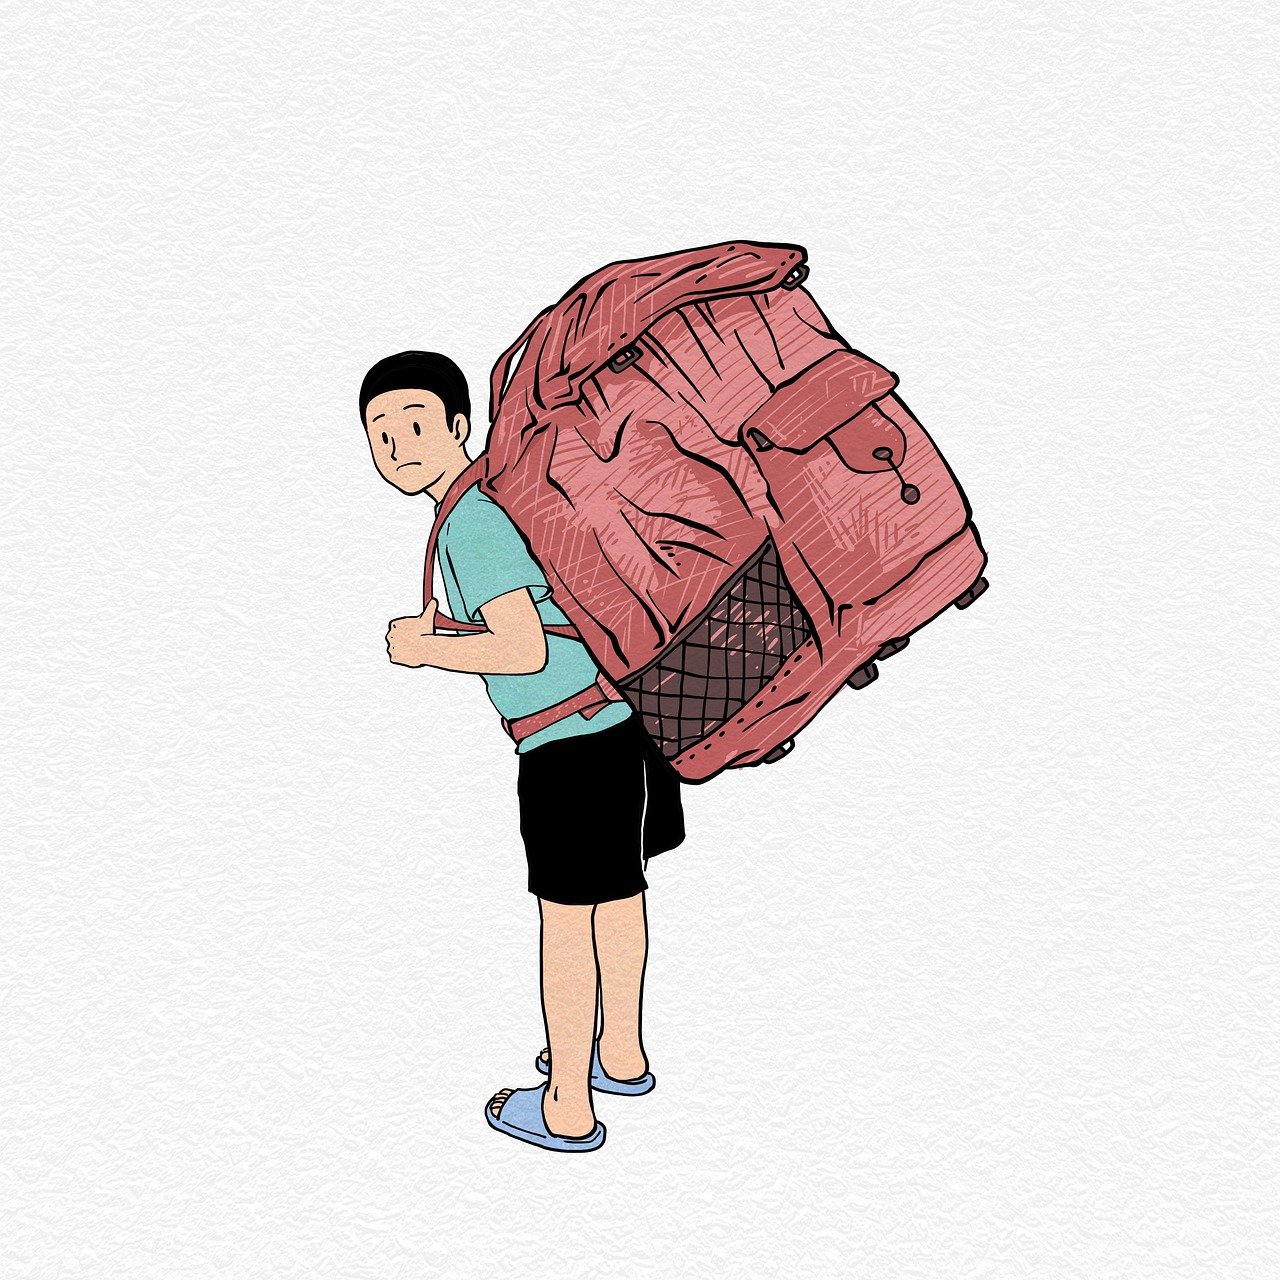 a man with a backpack on his back, an illustration of, by Kim Jeong-hui, shutterstock, happening, luggage, colorized, yihao ren, remove